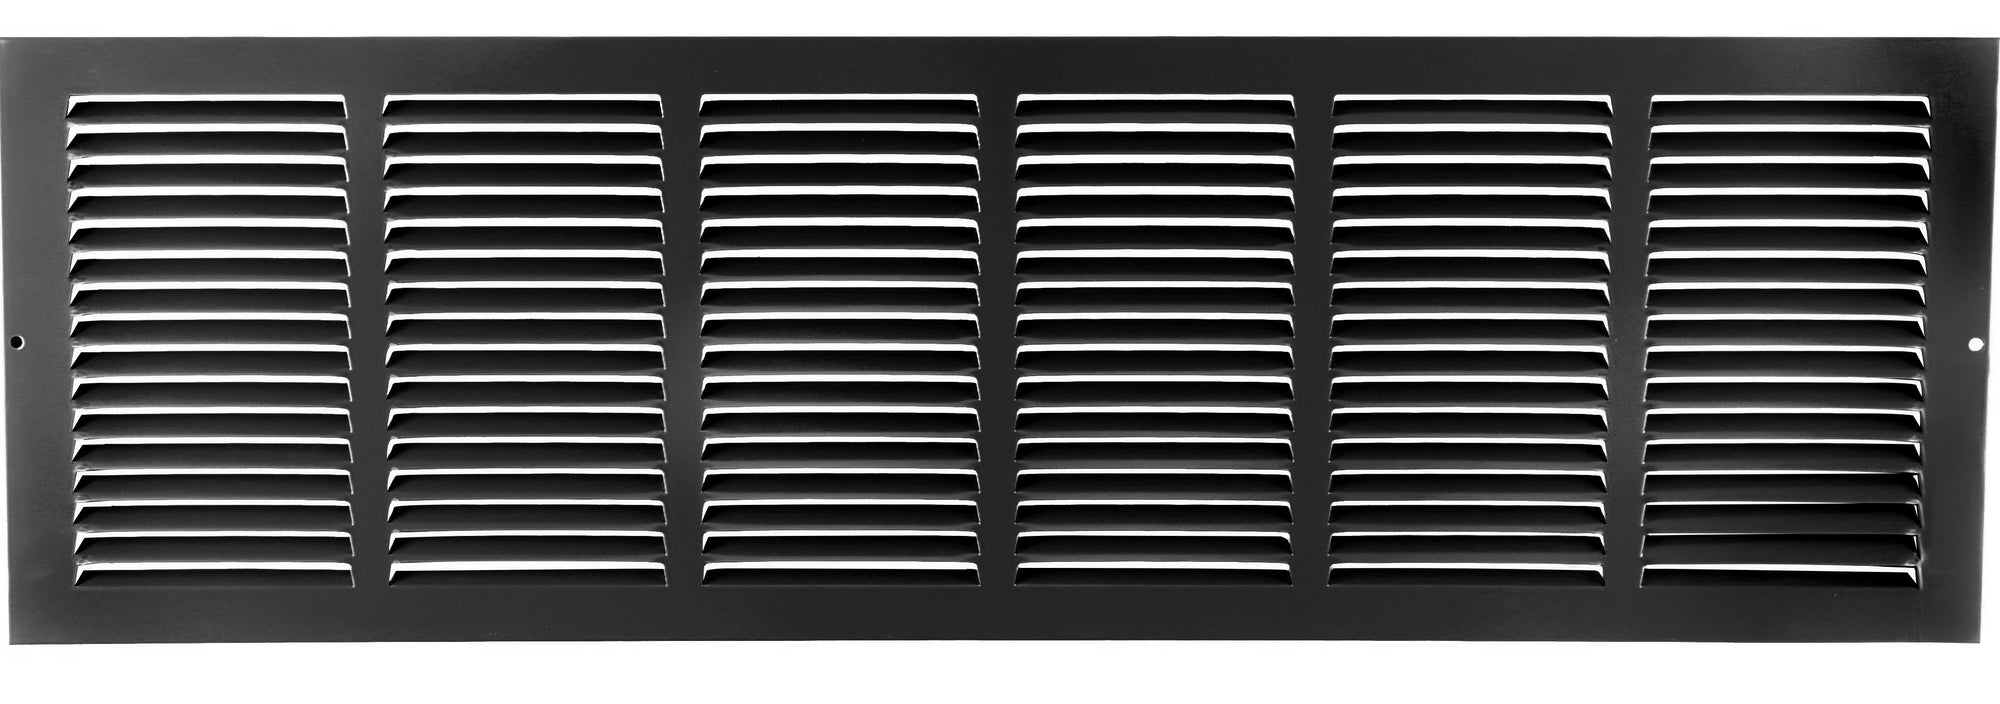 30" X 8" Air Vent Return Grilles - Sidewall and Ceiling - Steel